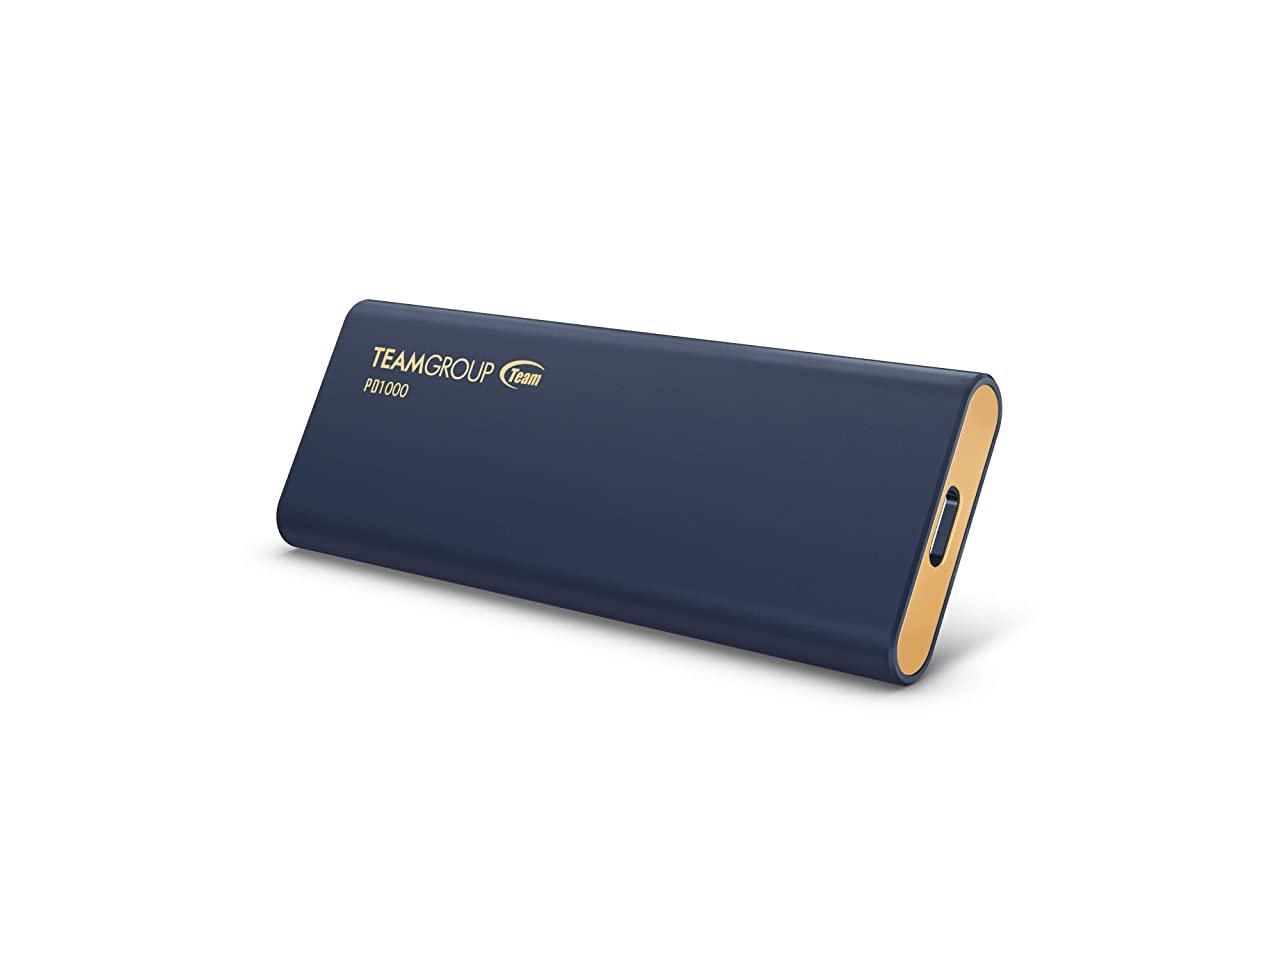 TEAMGROUP PD1000 1TB Aluminum Portable External Solid State Drive SSD, Read up to 1000MB/s, USB-C, USB A 3.2 Gen 2, Waterproof, Dustproof (IP68), Shockproof, Pressure Resistant (T8FED6001T0C108)